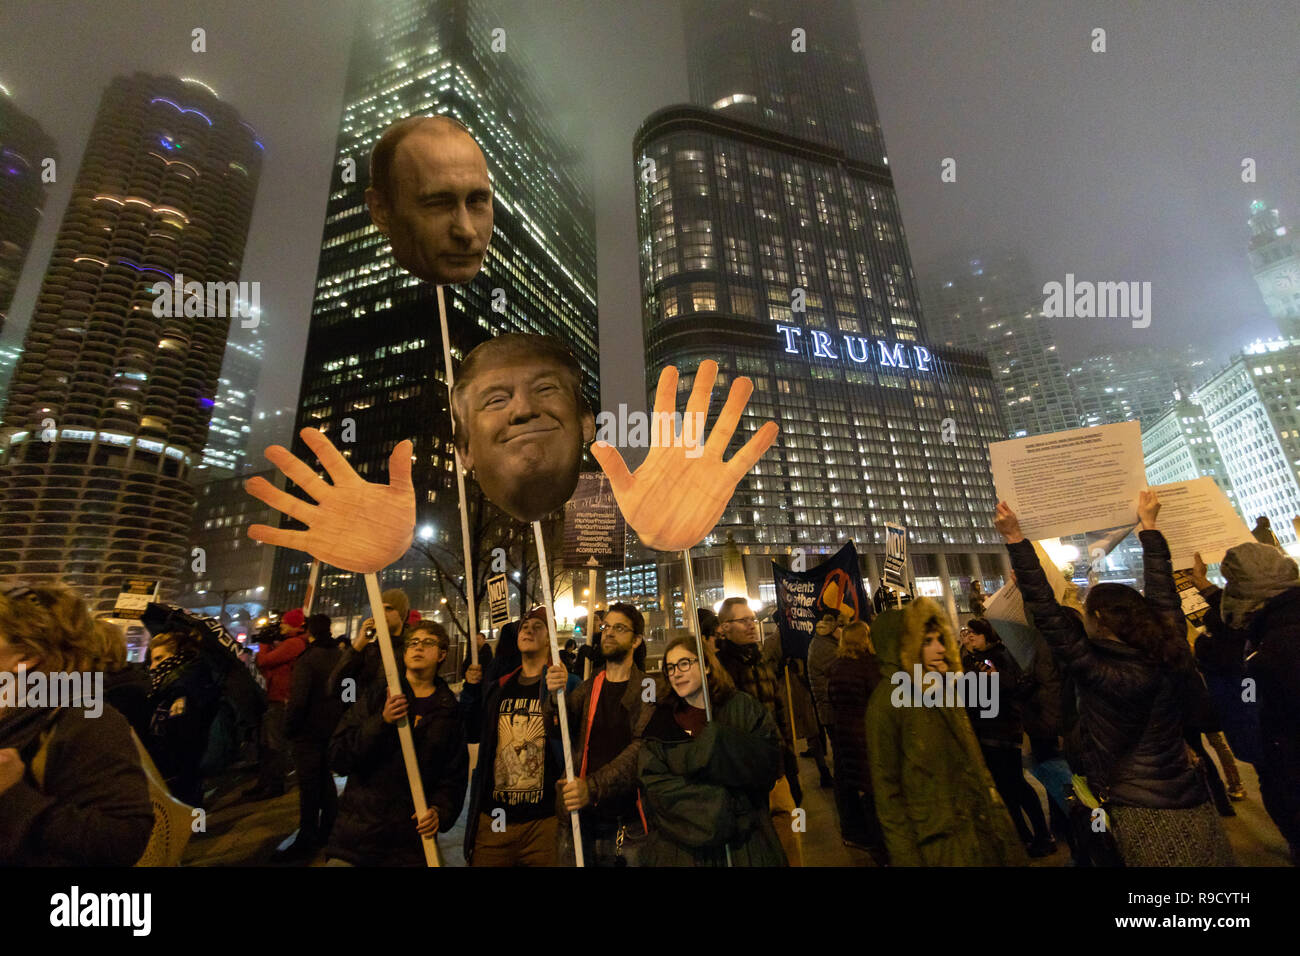 On the foggy evening of Donald Trumps inauguration protestors gather across the river from Chicago's Trump Tower. Stock Photo